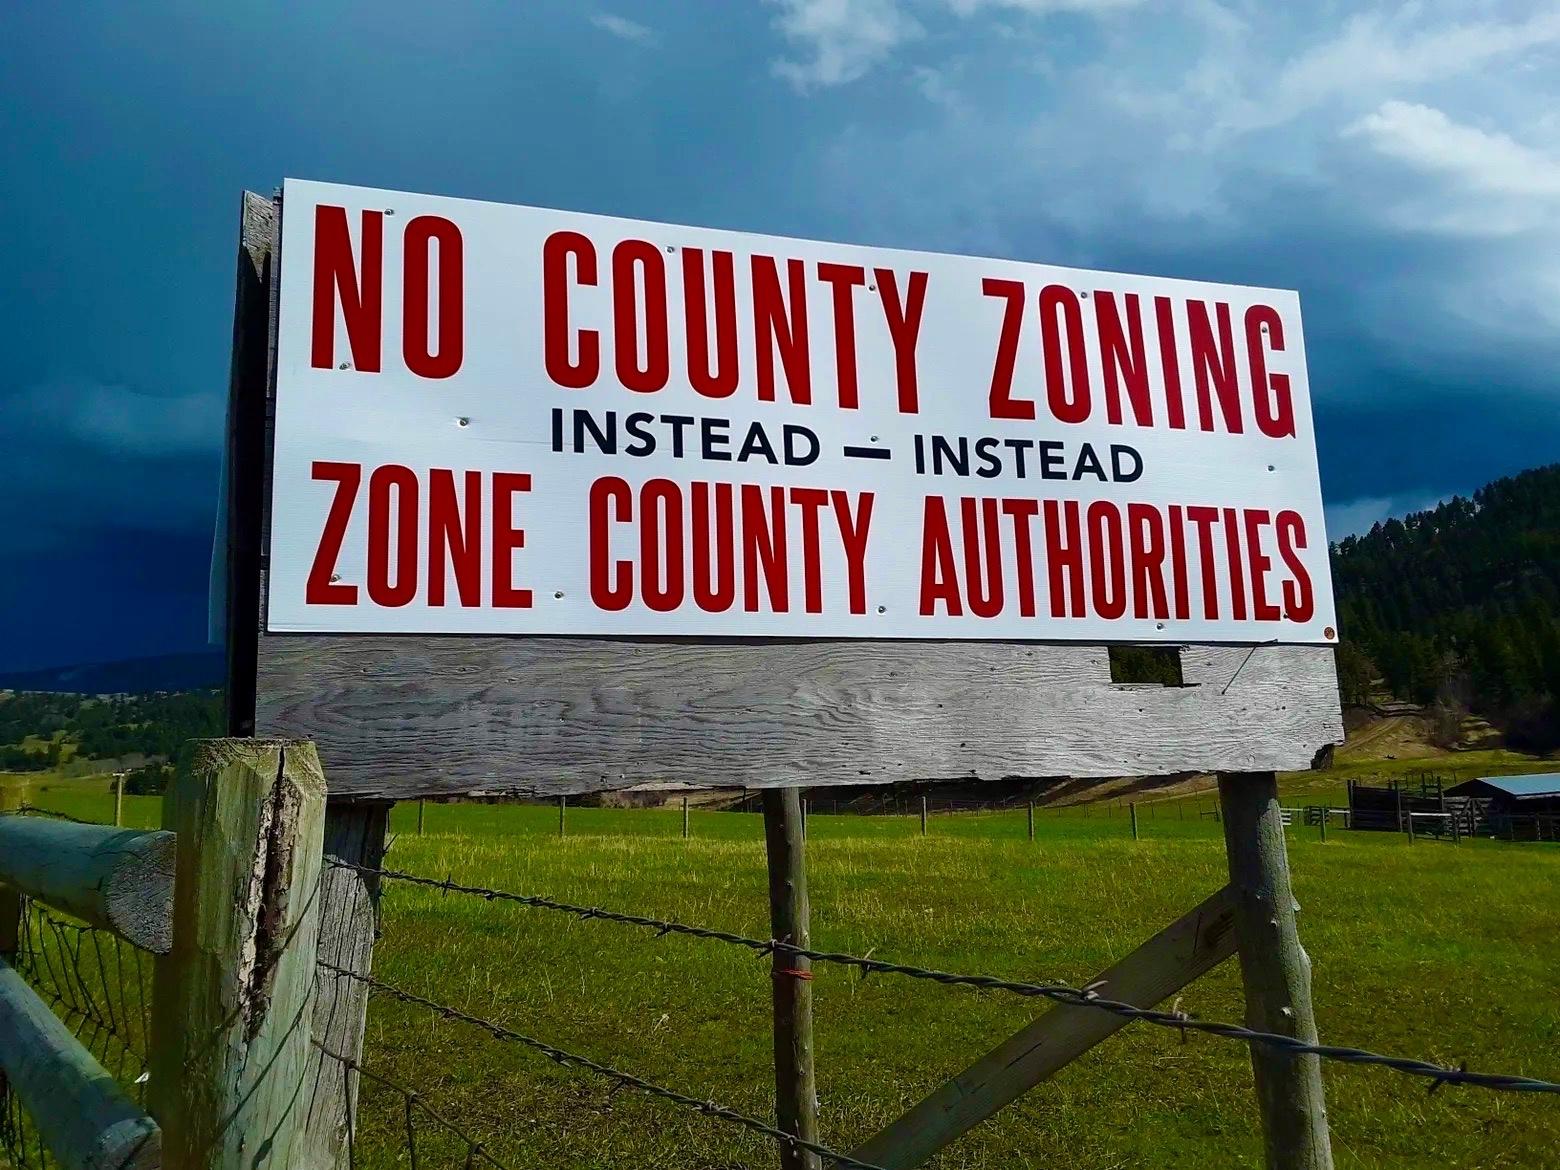 Signs like these have sprung up in Park County, Montana. What they fail to answer is what the county and Paradise Valley will look like in a few years without countywide zoning. Polls show citizens are concerned and angry about growth issues. Who will they hold responsible if no action is taken?